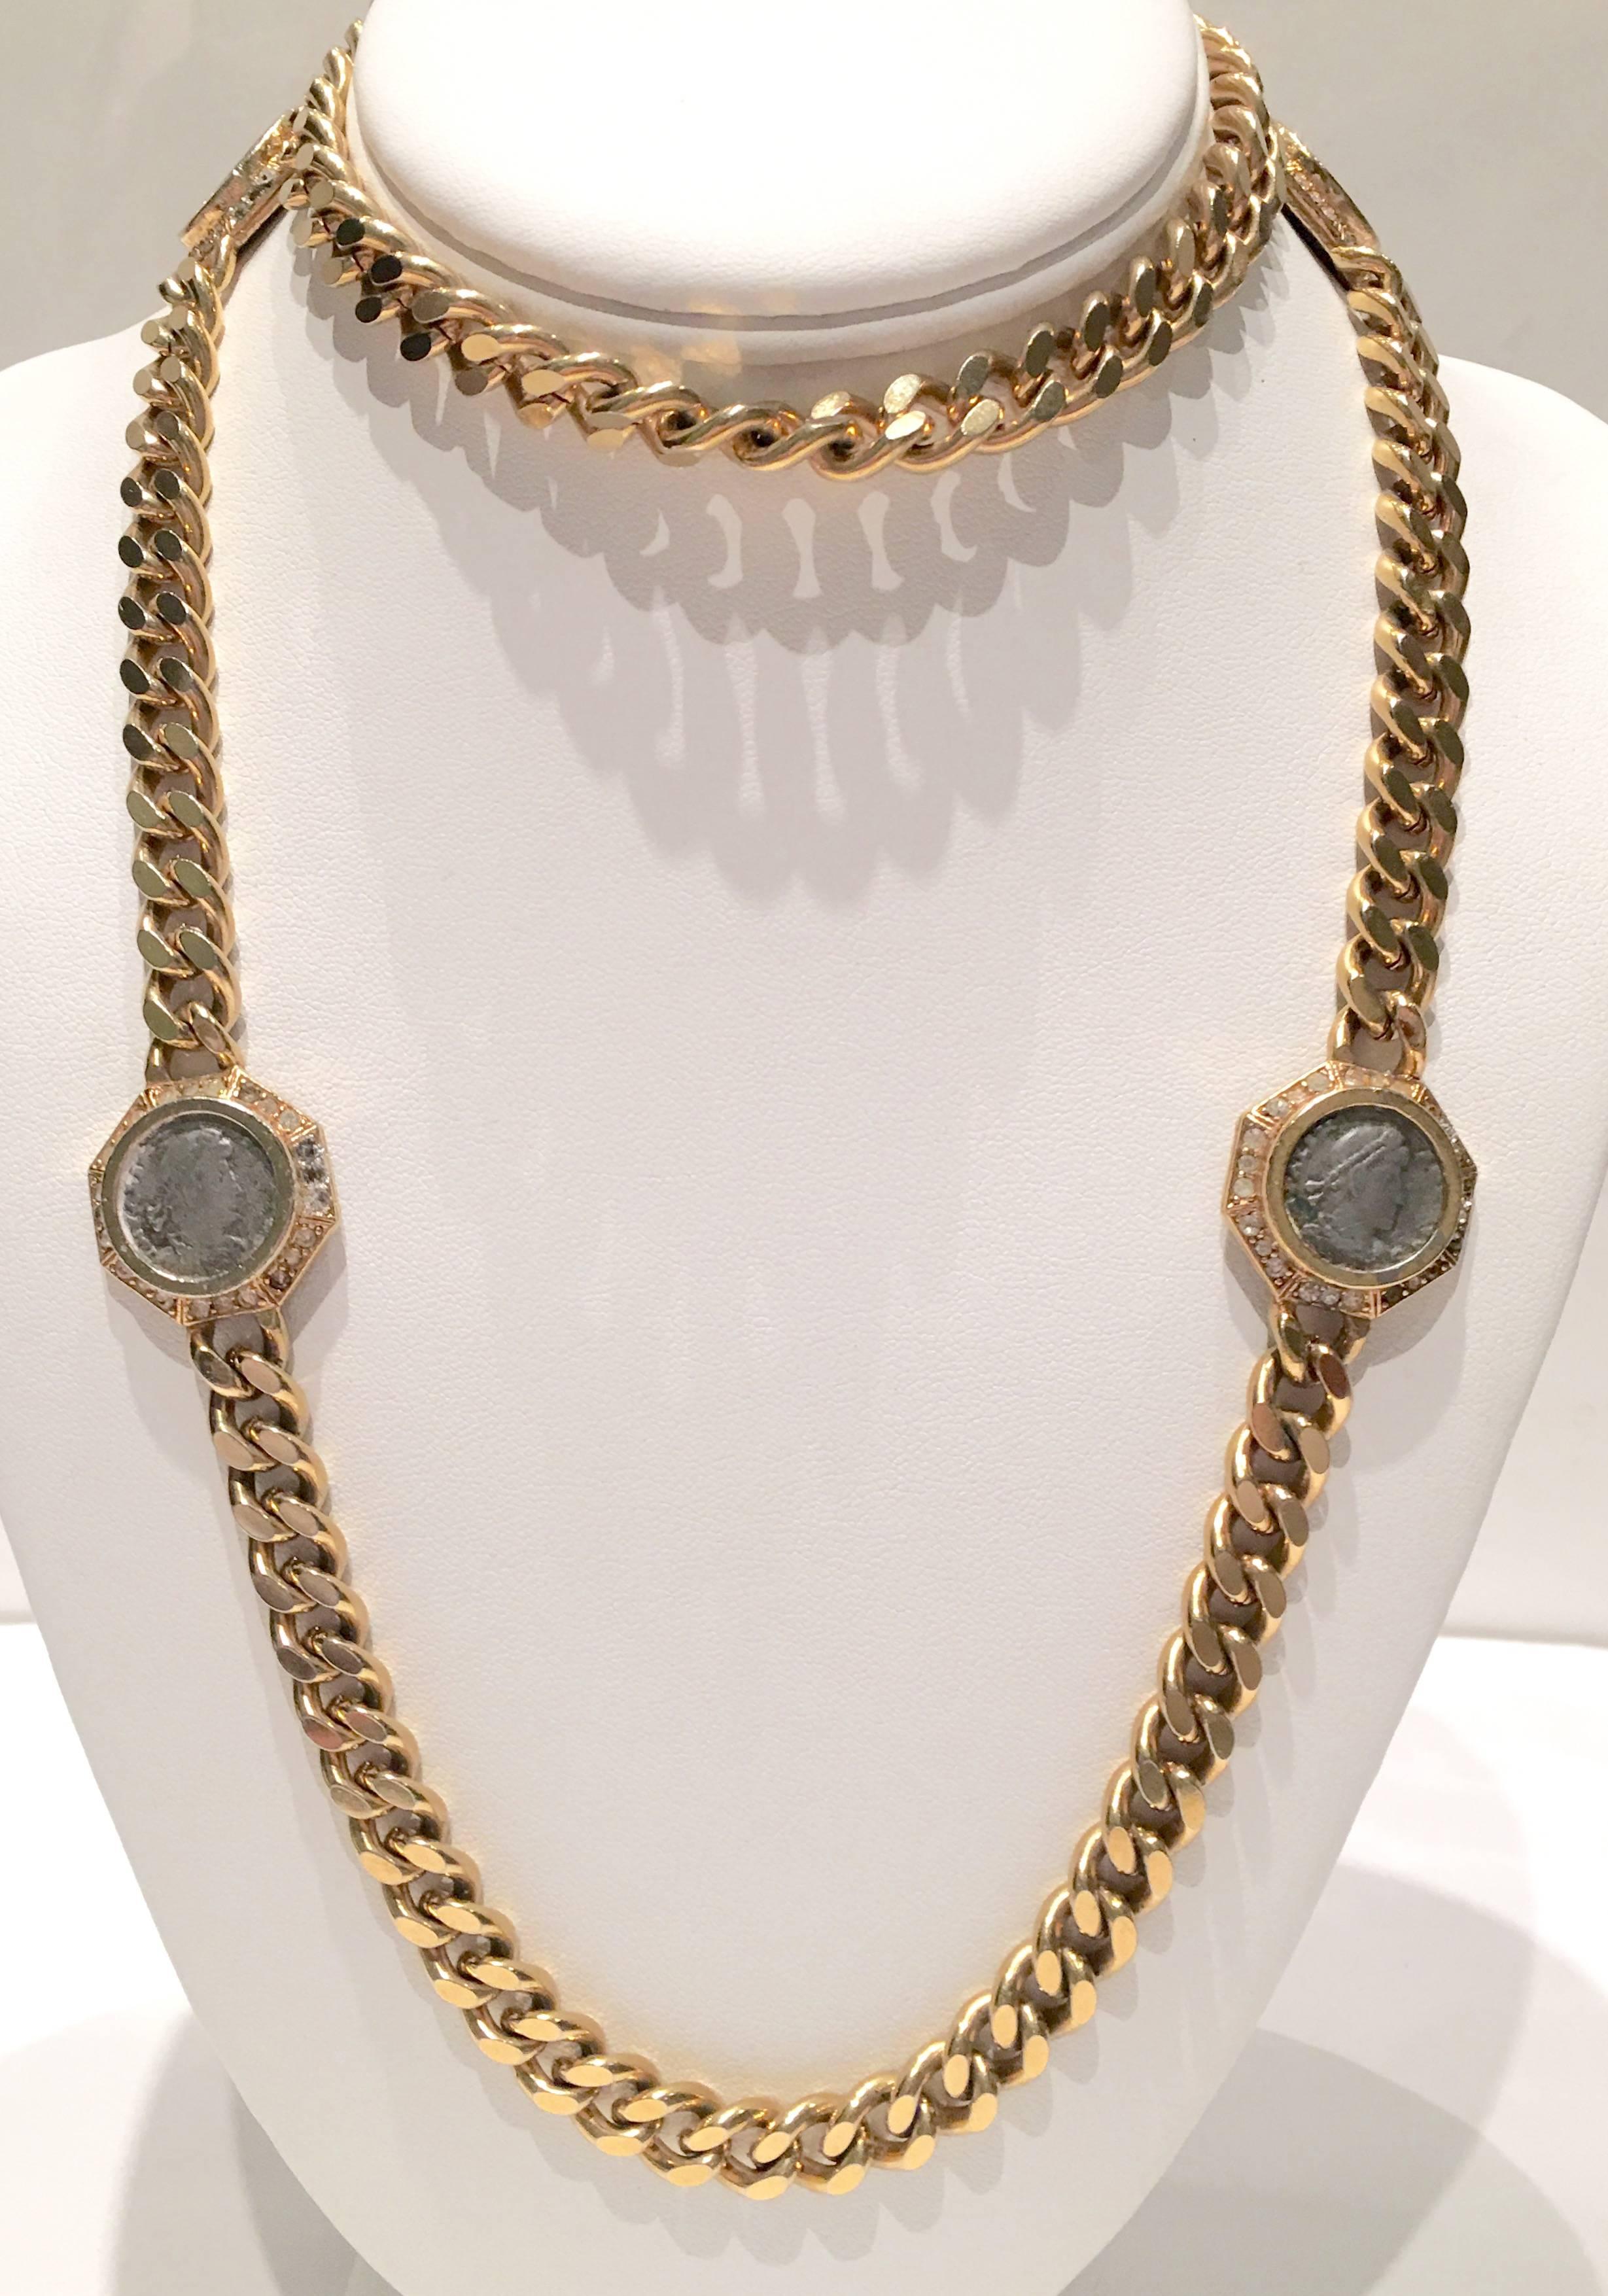 Vintage Ciner Opera-length 18K yellow gold-plated chain link rope necklace with pewter faux-Roman coins surrounded by pavé set Austrian crystal clear rhinestones. Each of the four 1